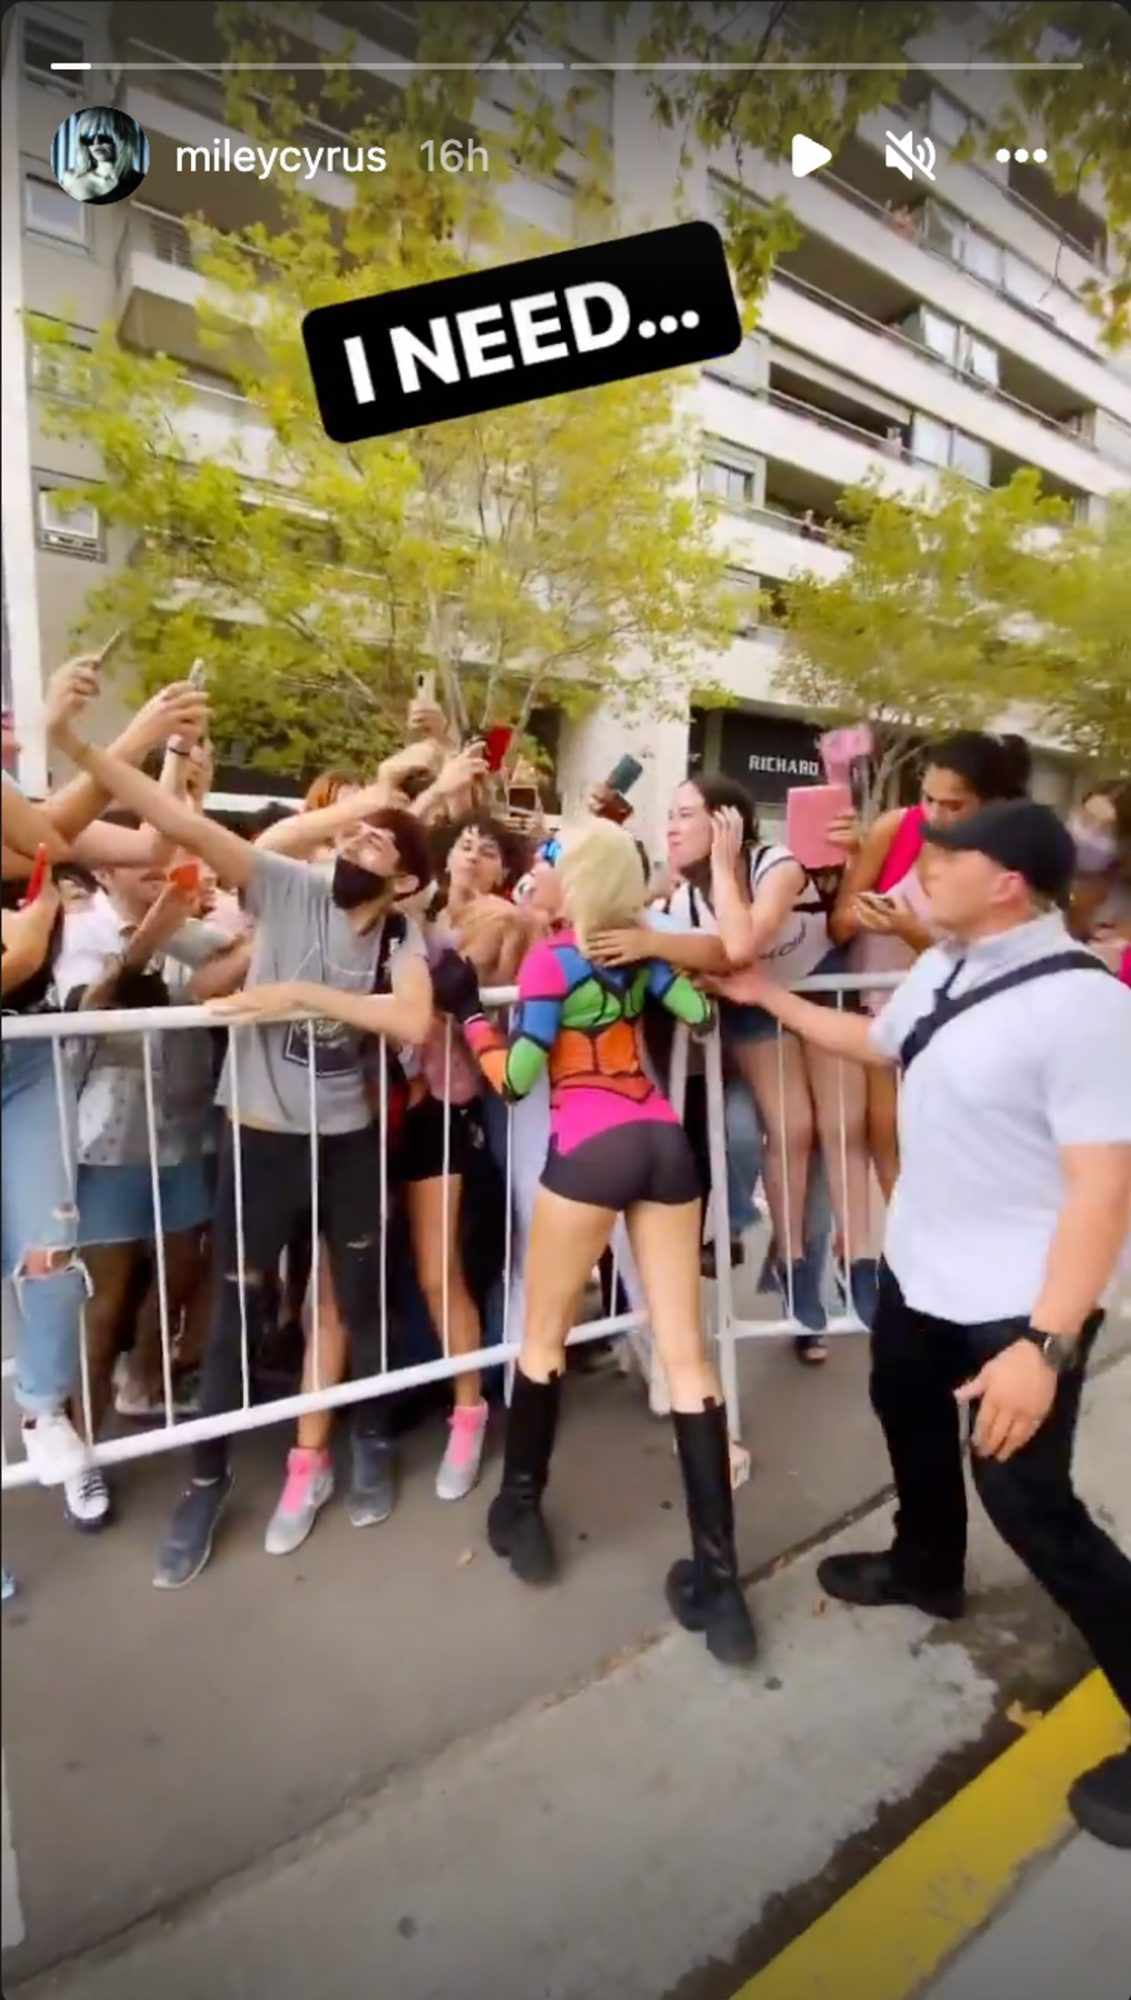 Miley Cyrus Multi-Colored Romper Fans Instagram Story